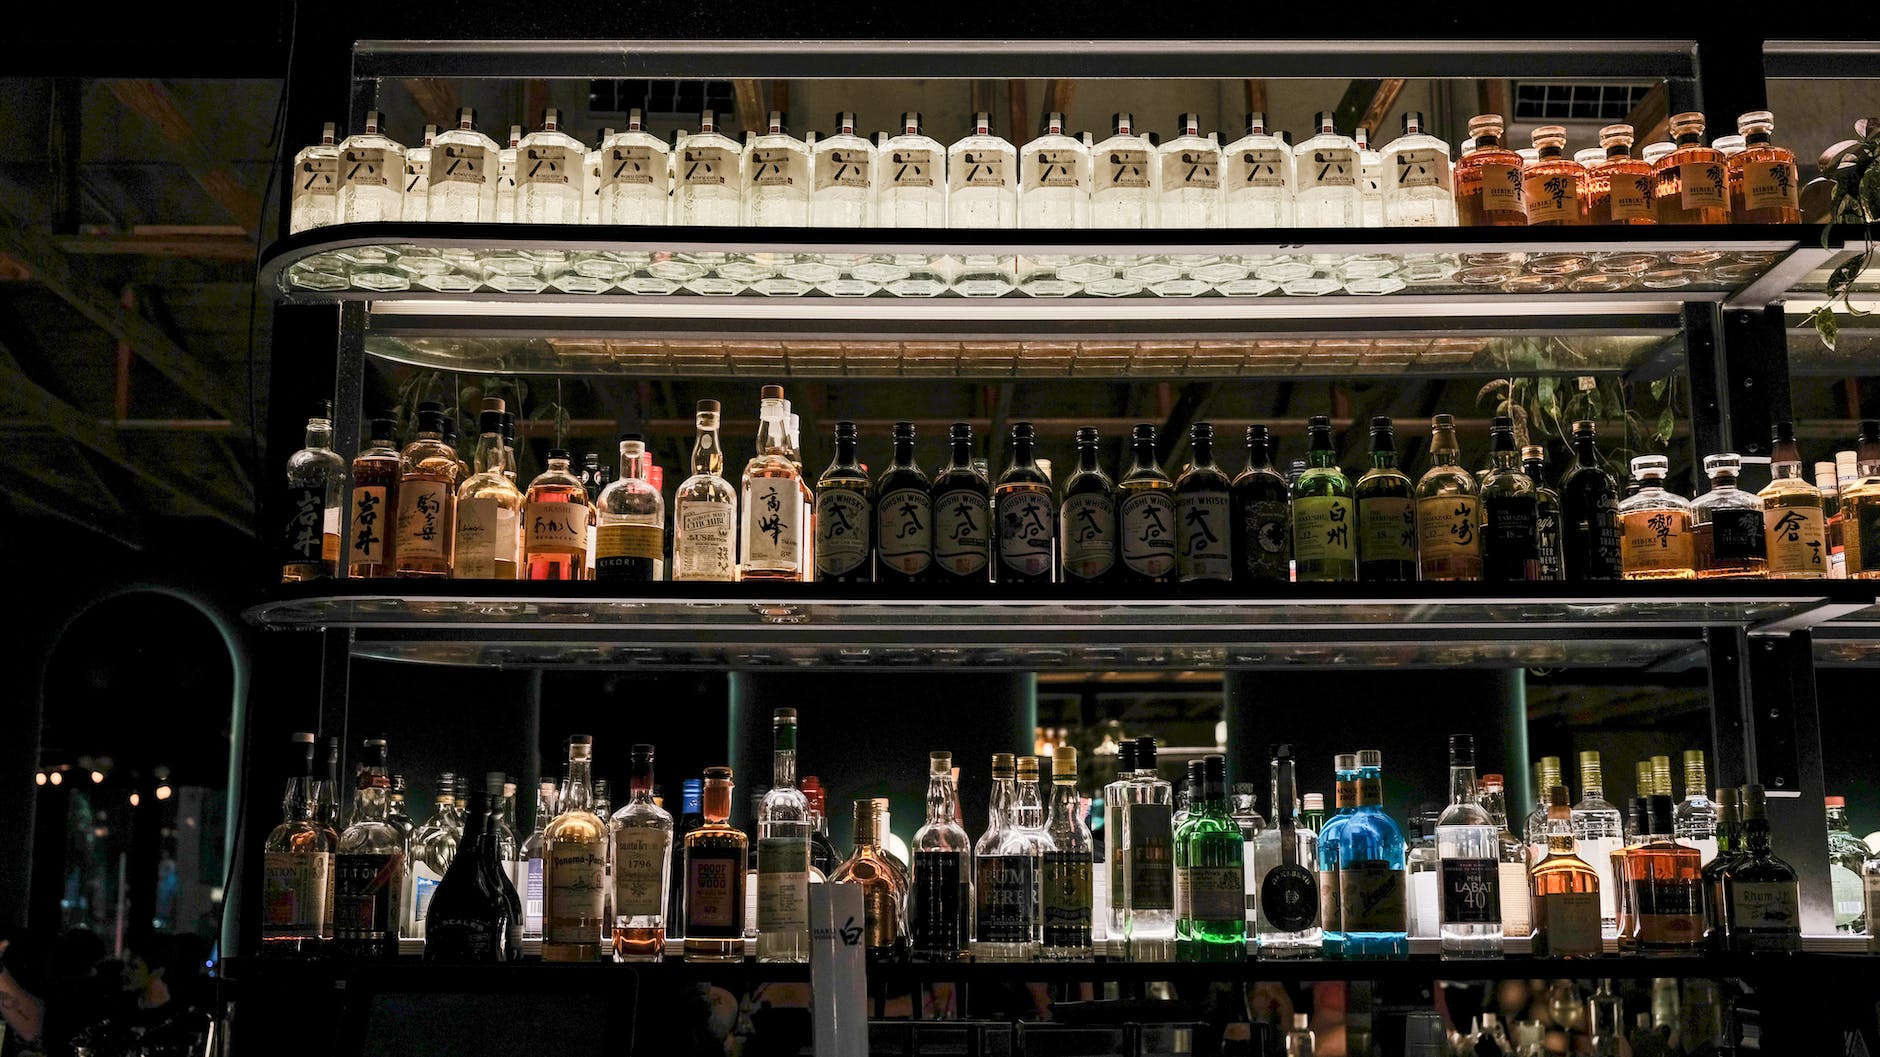 bar shelves filled with bottles (Photo by Raphael Loquellano)